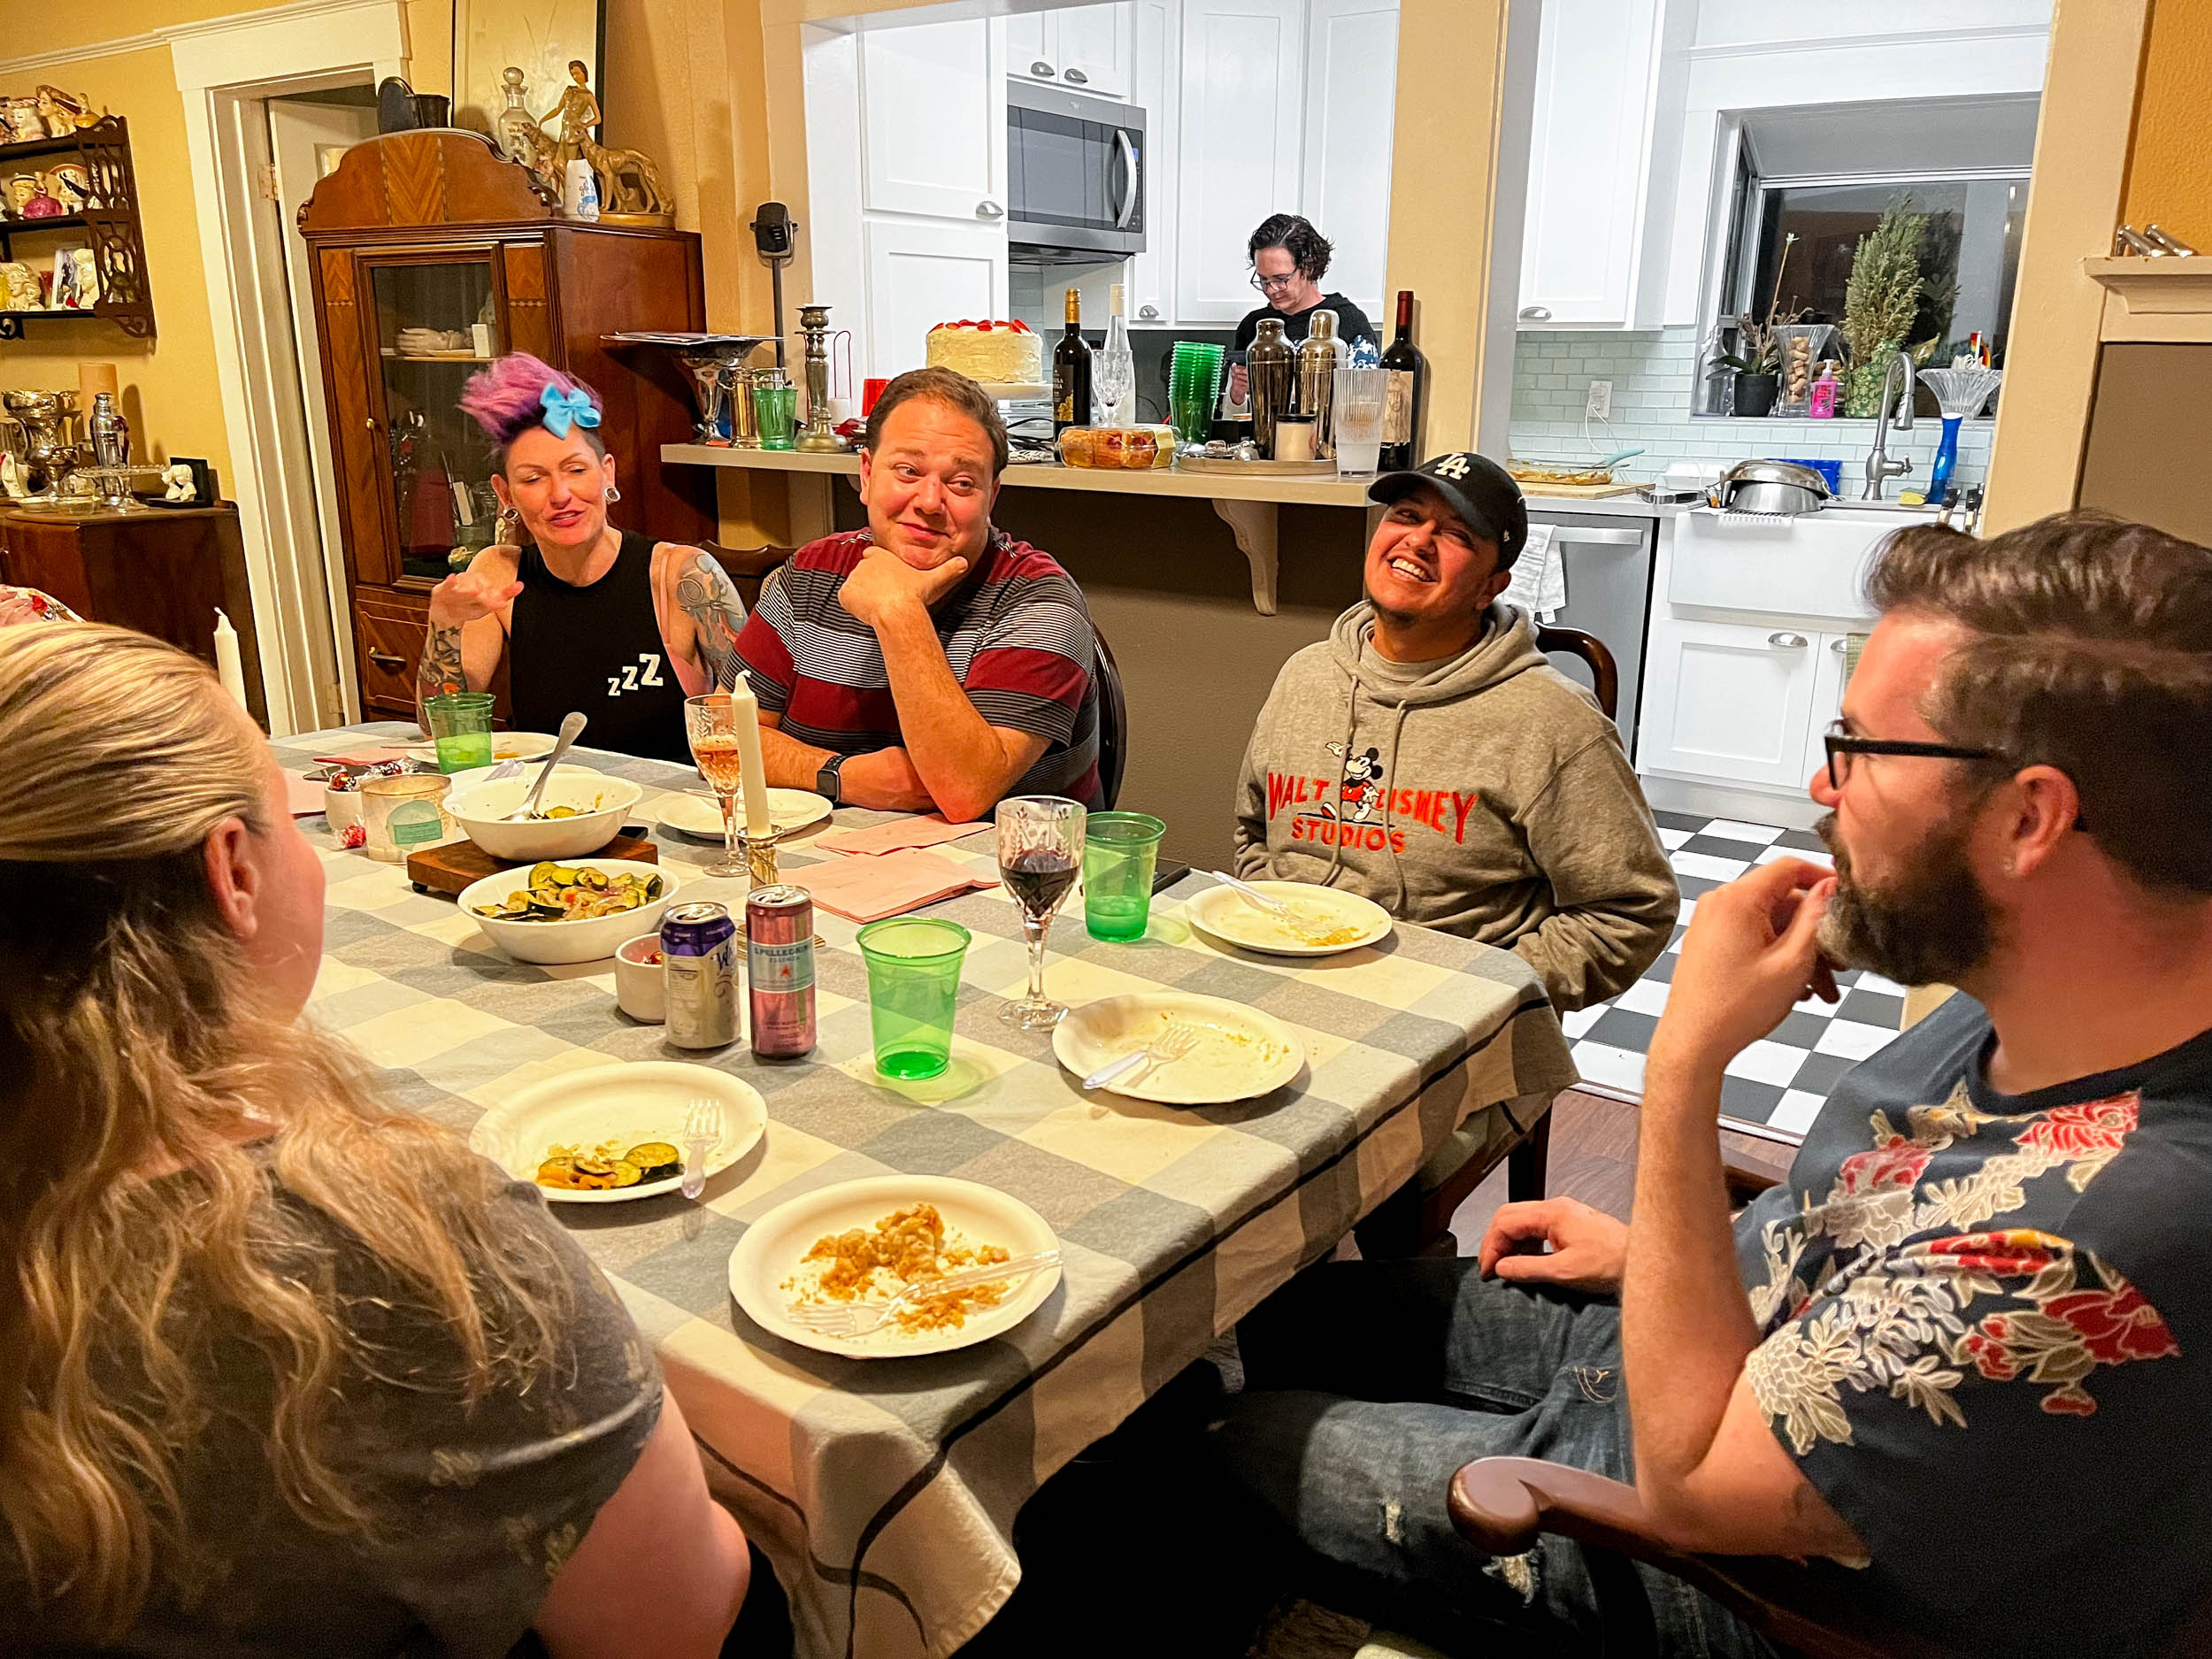 Five people sit around a dining room table smiling at eachother with plates of food in front of them. One can be seen through a window into the kitchen.